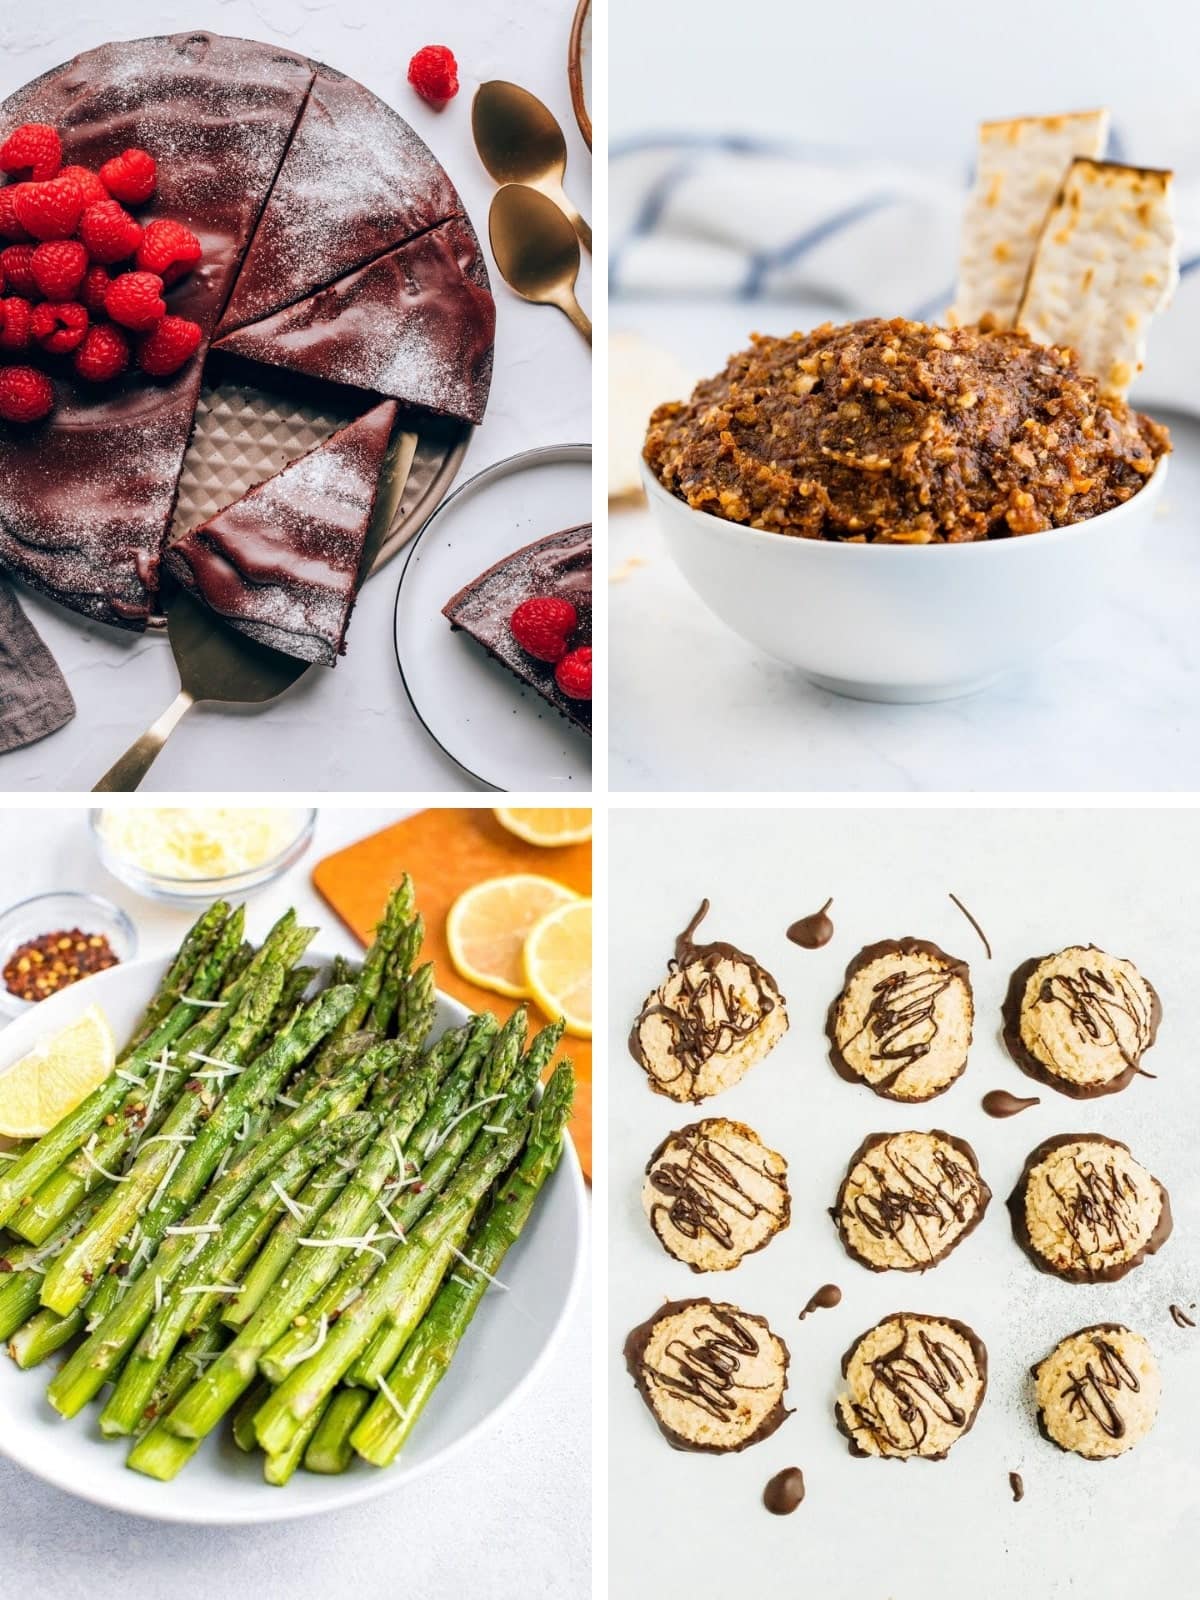 A collage with recipes for Passover - a flourless chocolate cake, charoset, asparagus and macaroons.